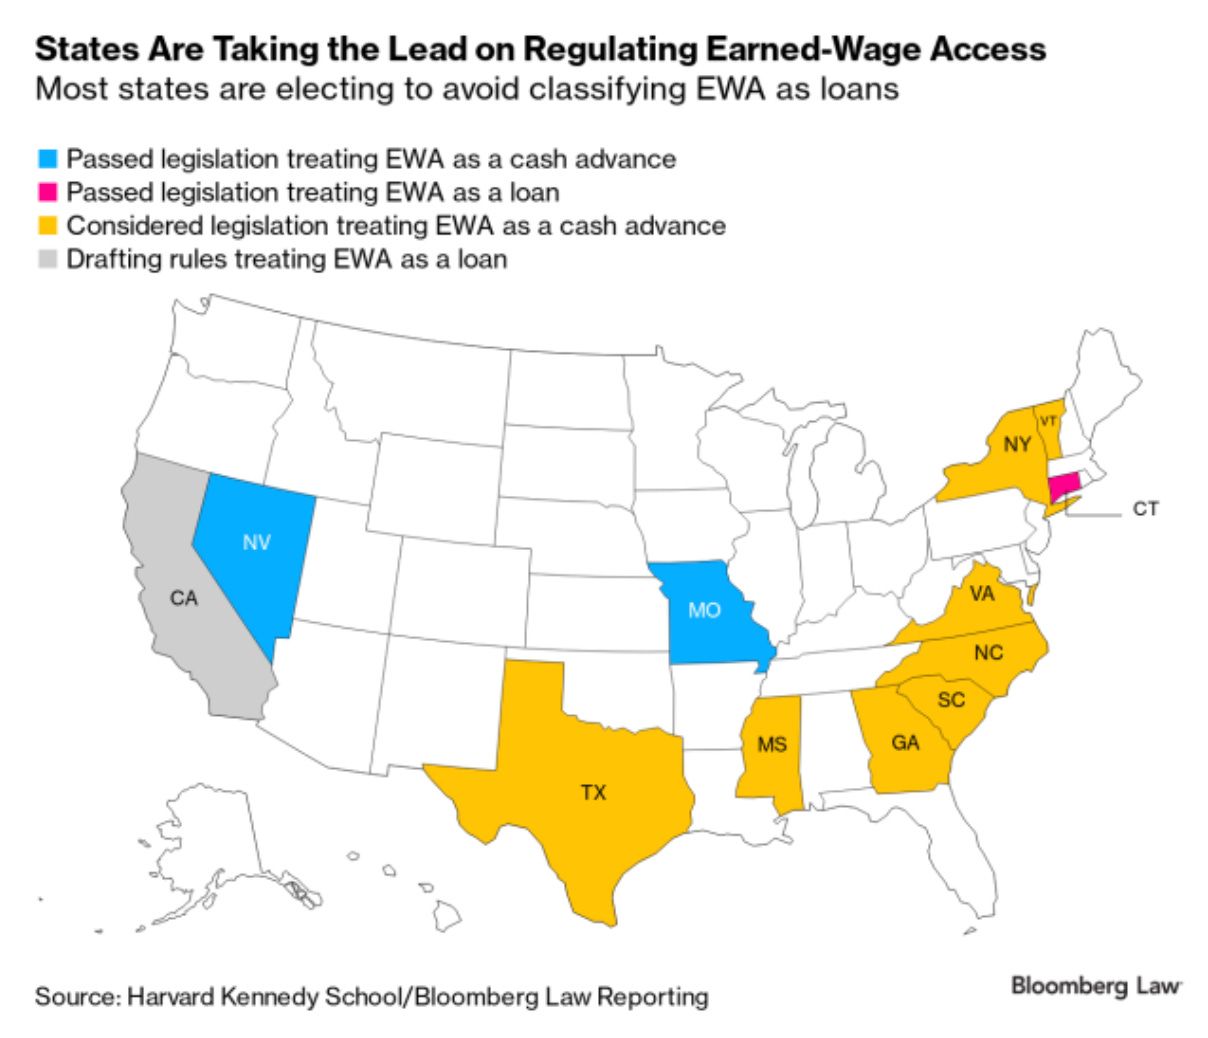 Different US states are taking different legislative directions regarding Earned Wage Access offering